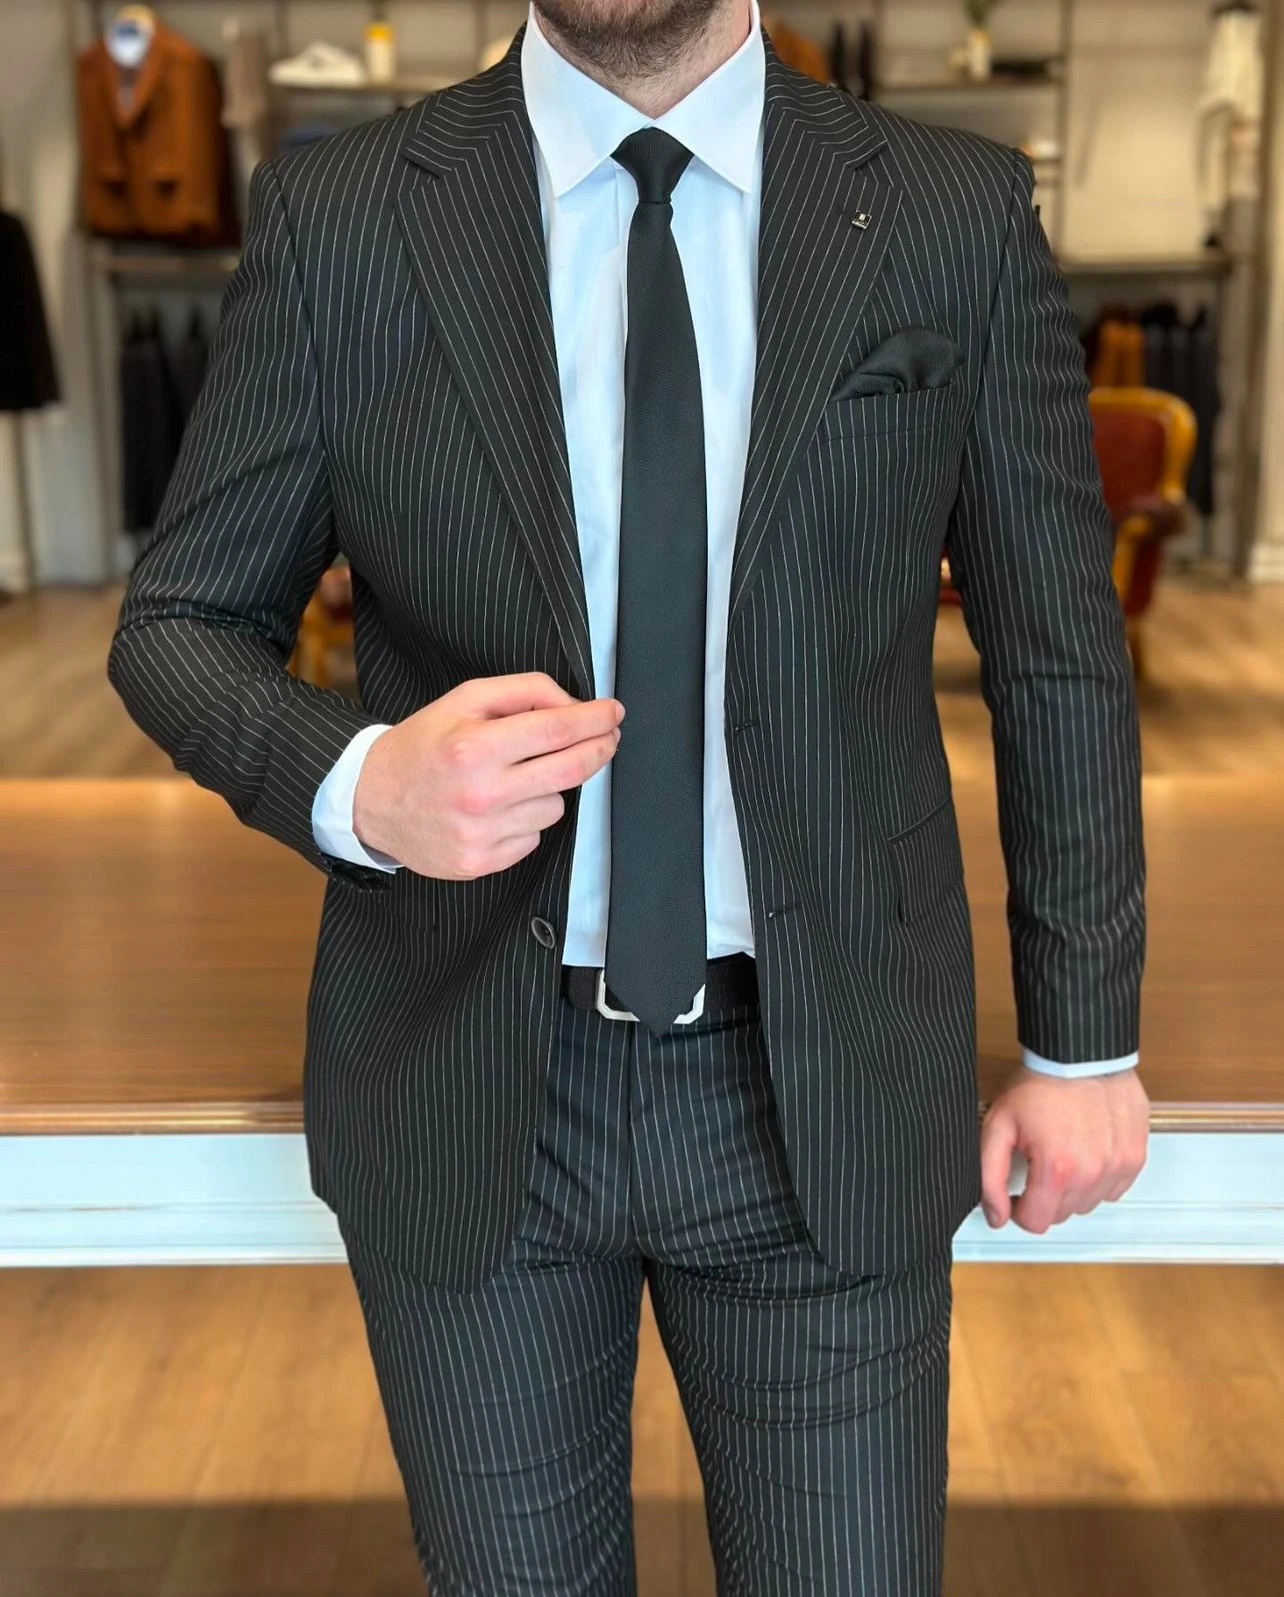 

Elegent Black Pinstriped Suits For Mens Business Blazer Wedding Groom Tuxedo Daily Suits 2 Piece Jacket Pants Terno Masculino